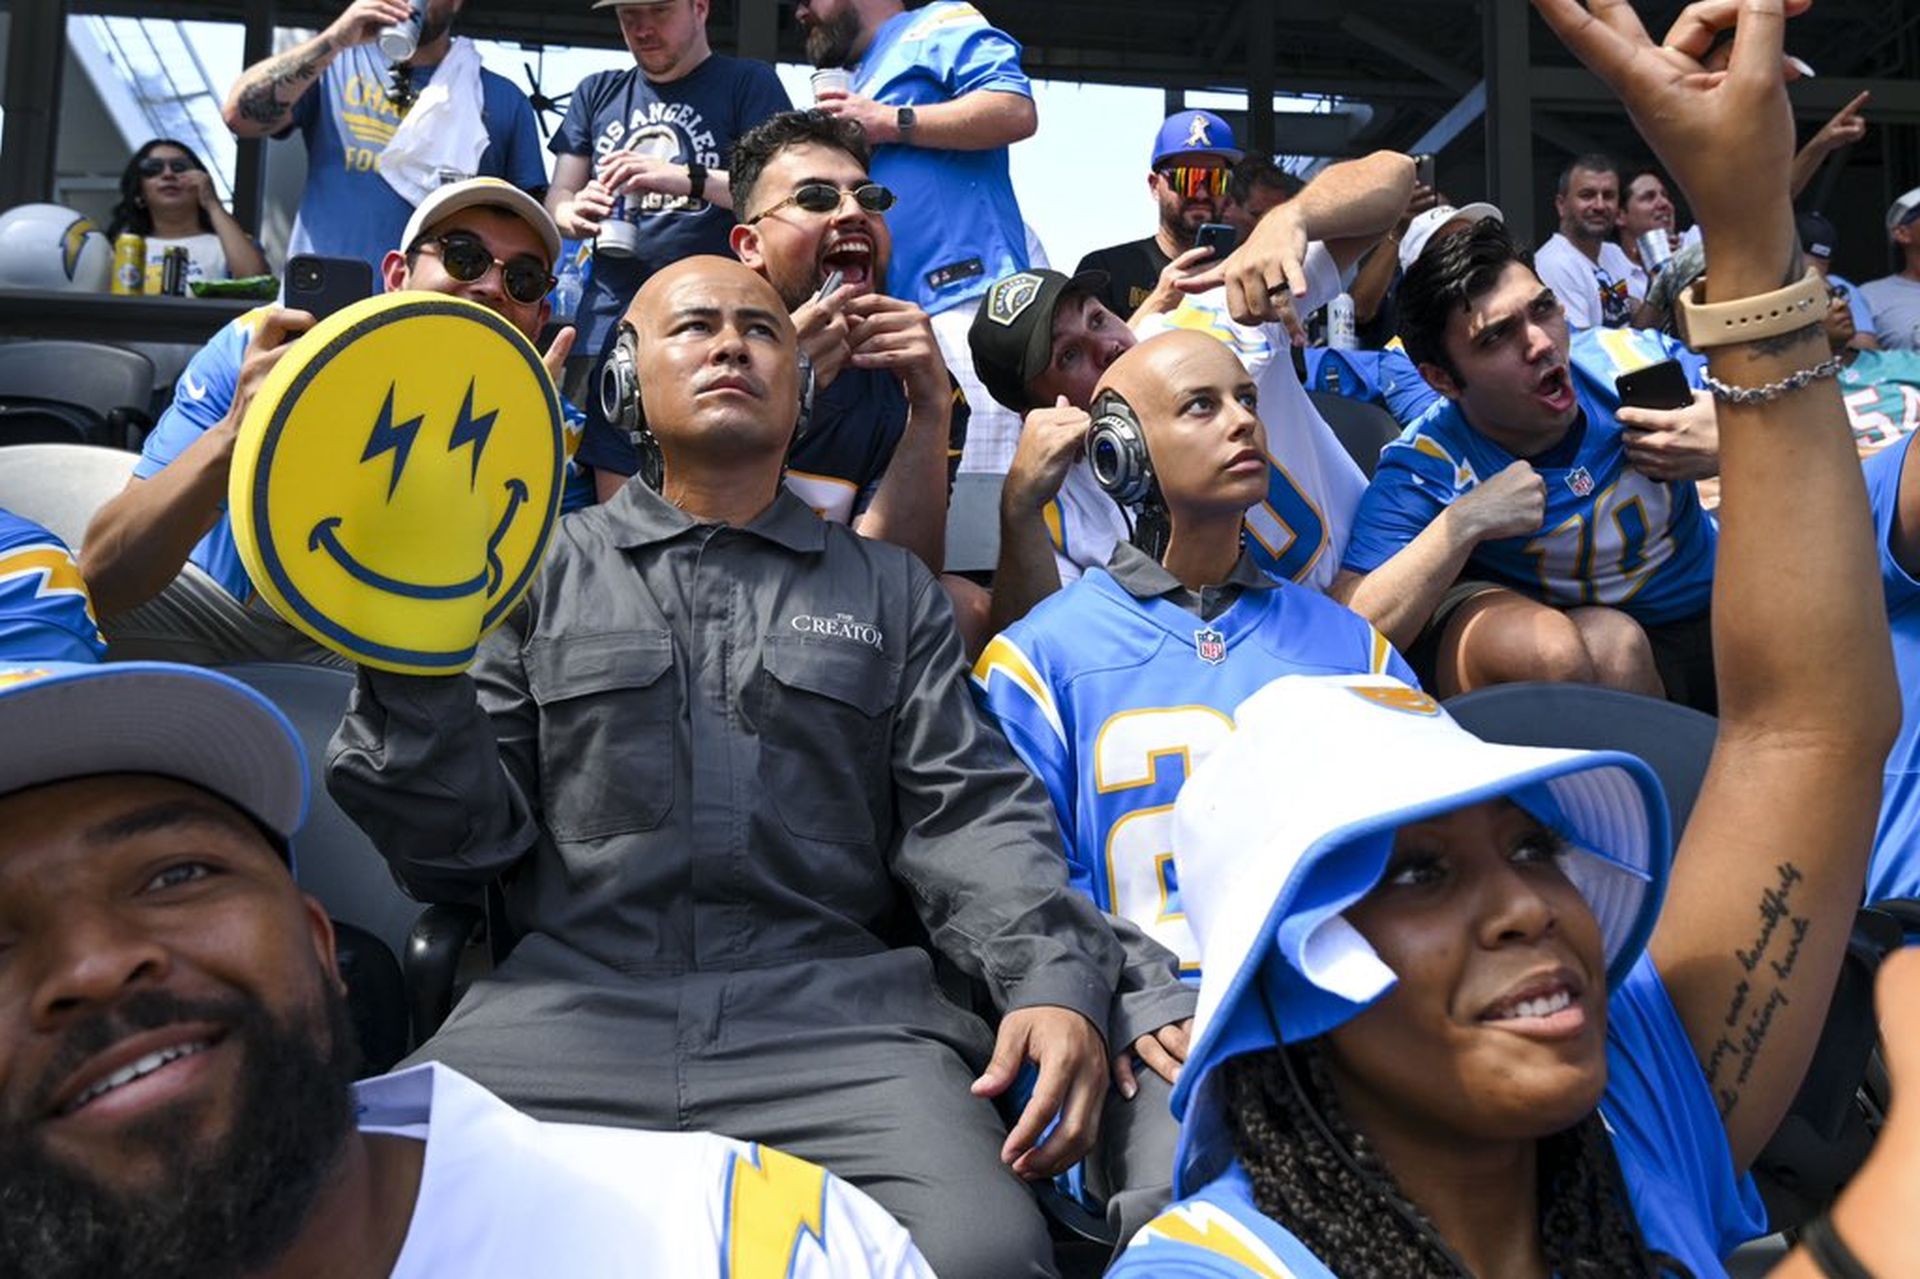 AI robot fans at Chargers game